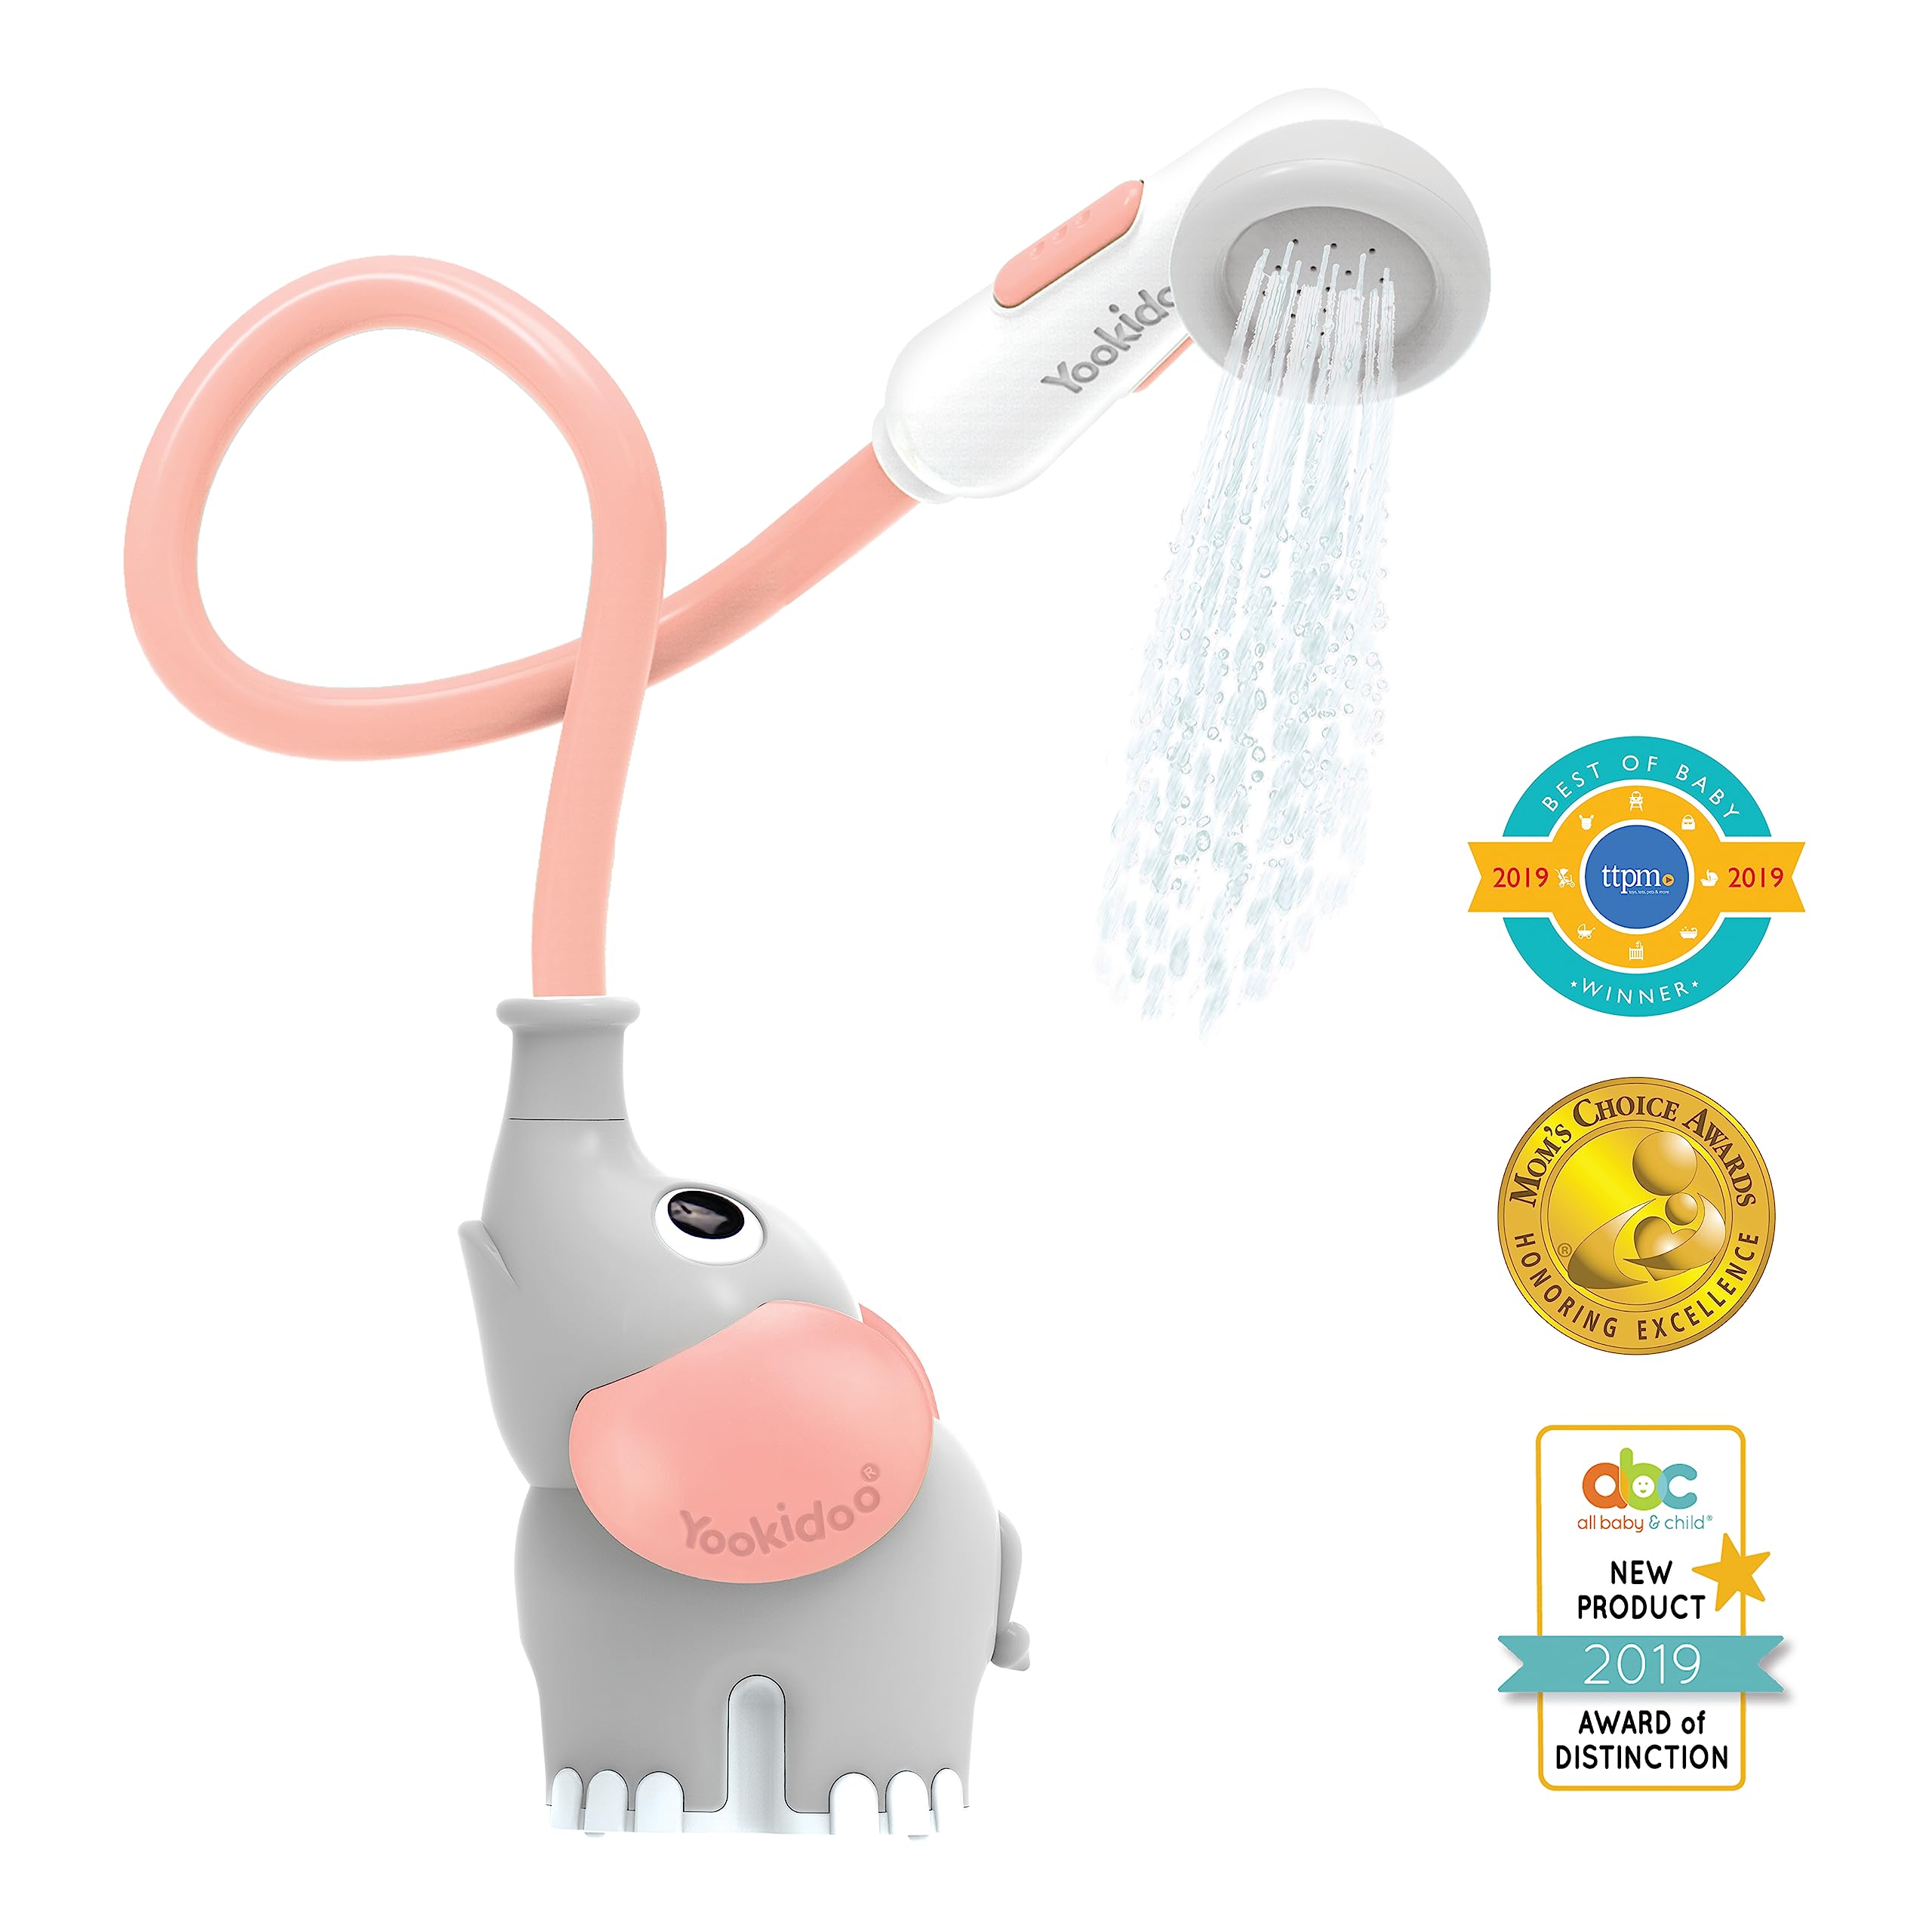 Yookidoo Baby Bath Shower Head - Elephant Water Pump with Trunk Spout Rinser - Control Water Flow from 2 Elephant Trunk Knobs for Maximum Fun in Tub or Sink for Newborn Babies(Pink)